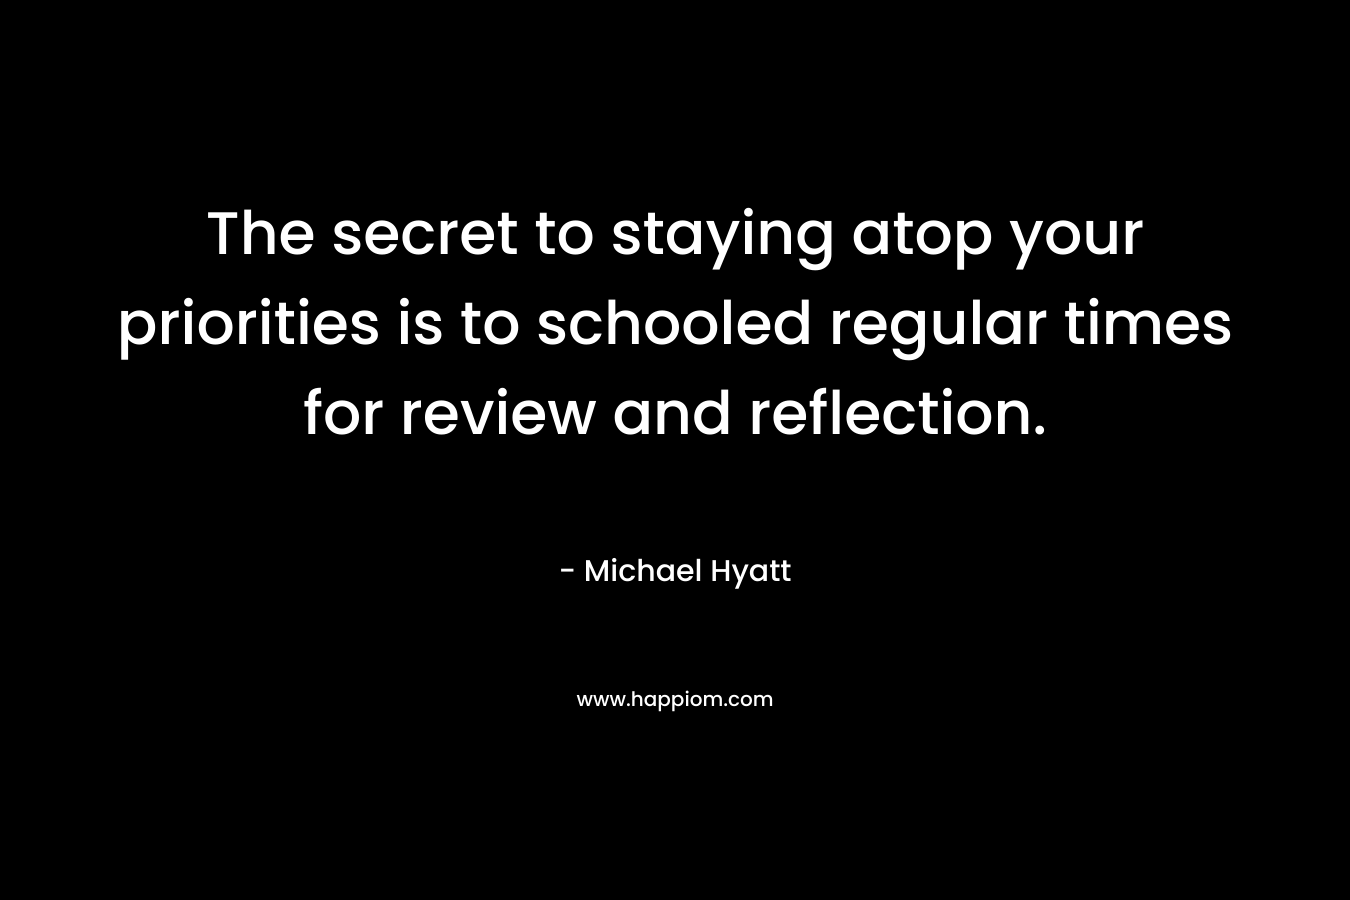 The secret to staying atop your priorities is to schooled regular times for review and reflection. – Michael Hyatt